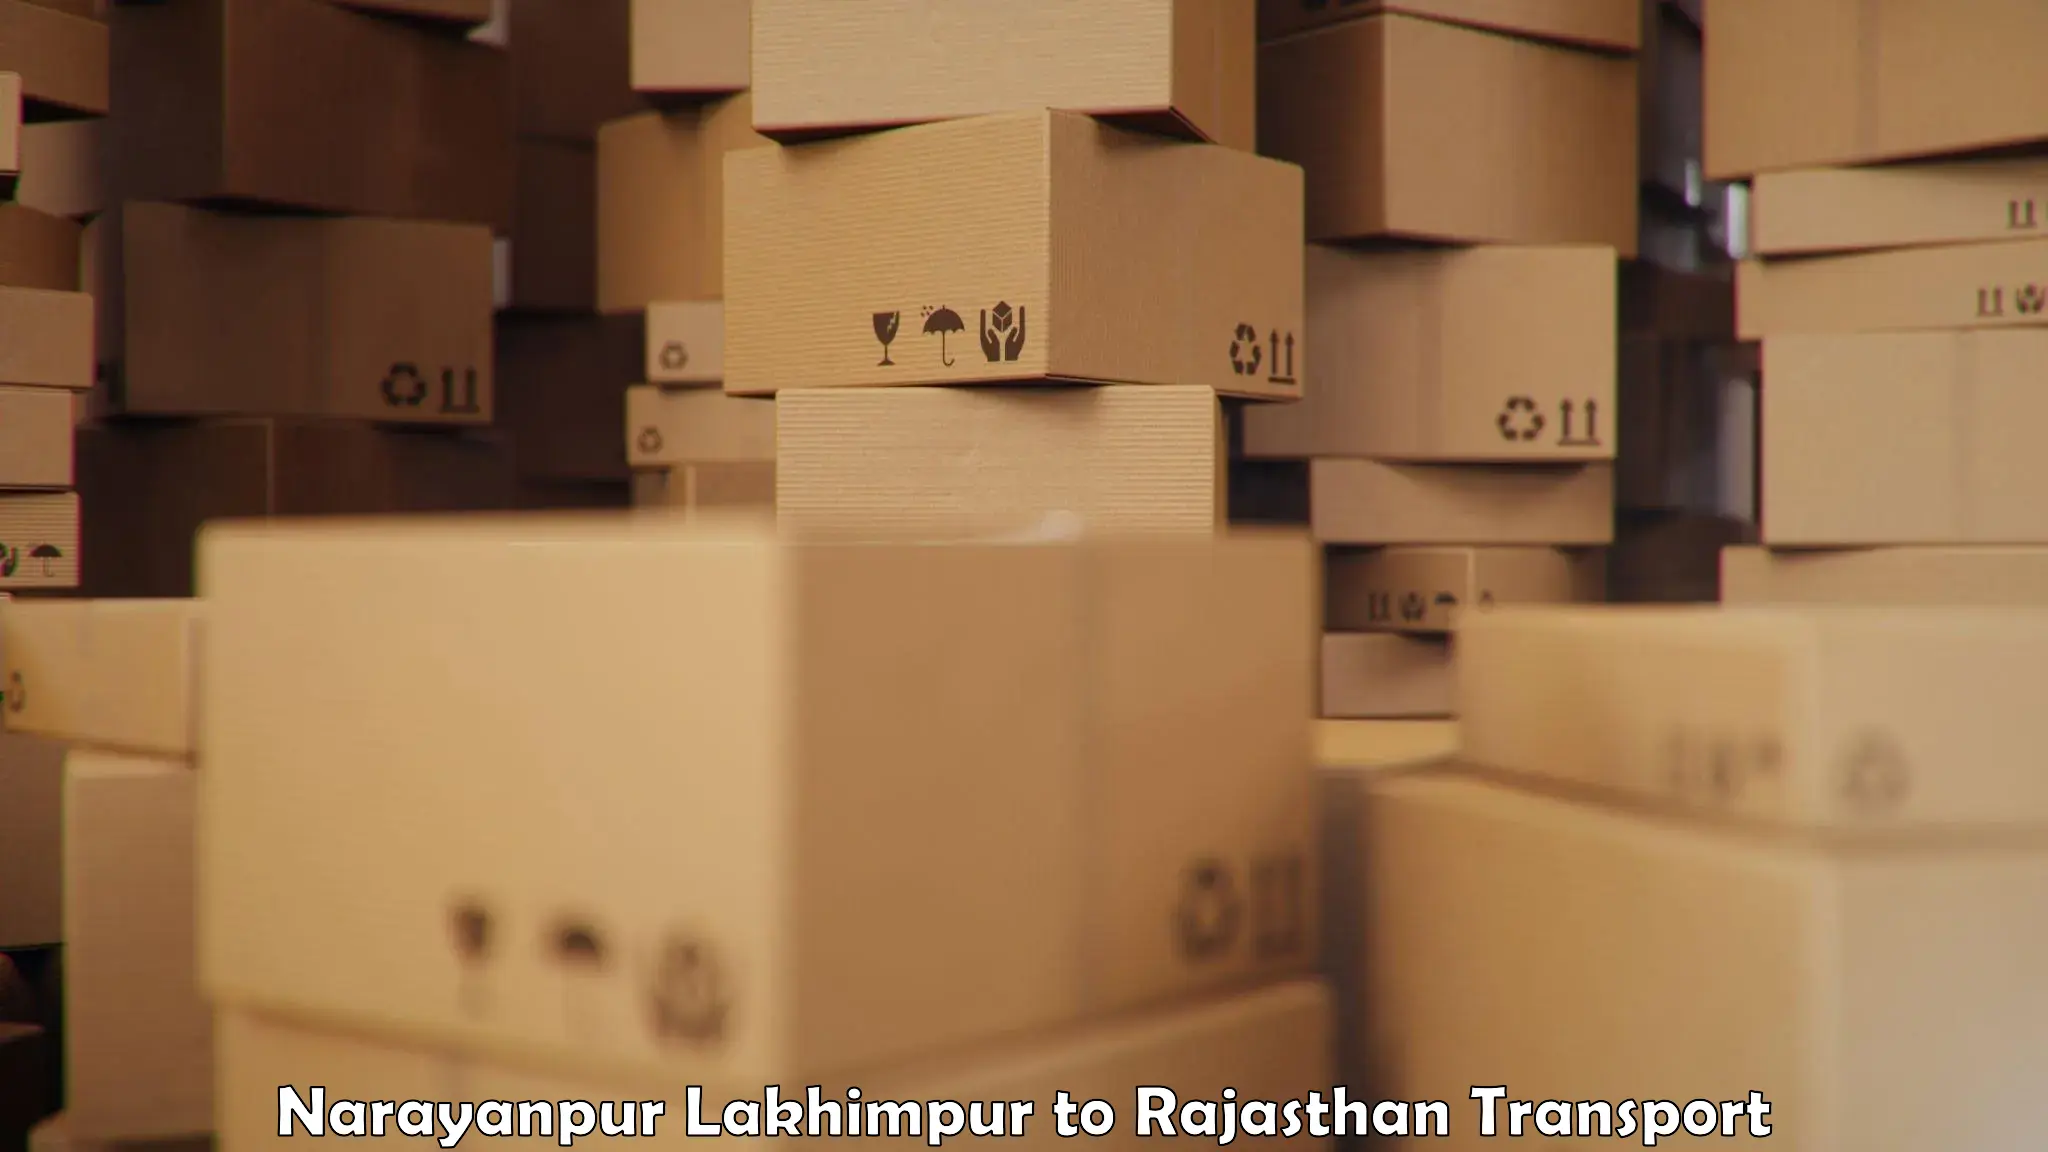 Truck transport companies in India Narayanpur Lakhimpur to Bassi